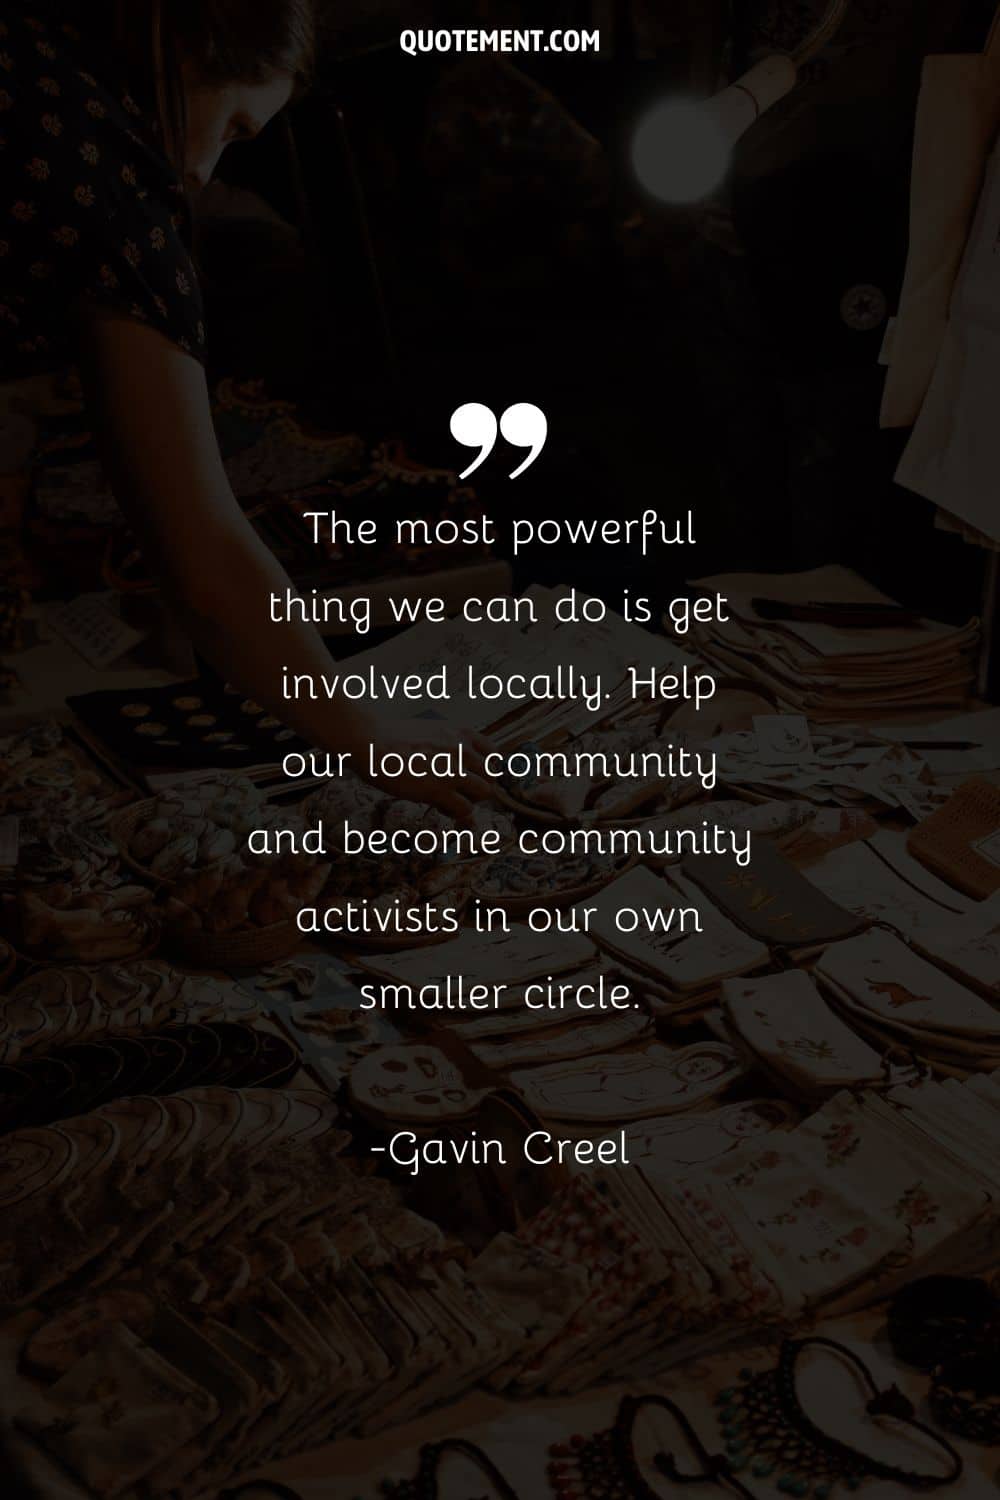 The most powerful thing we can do is get involved locally